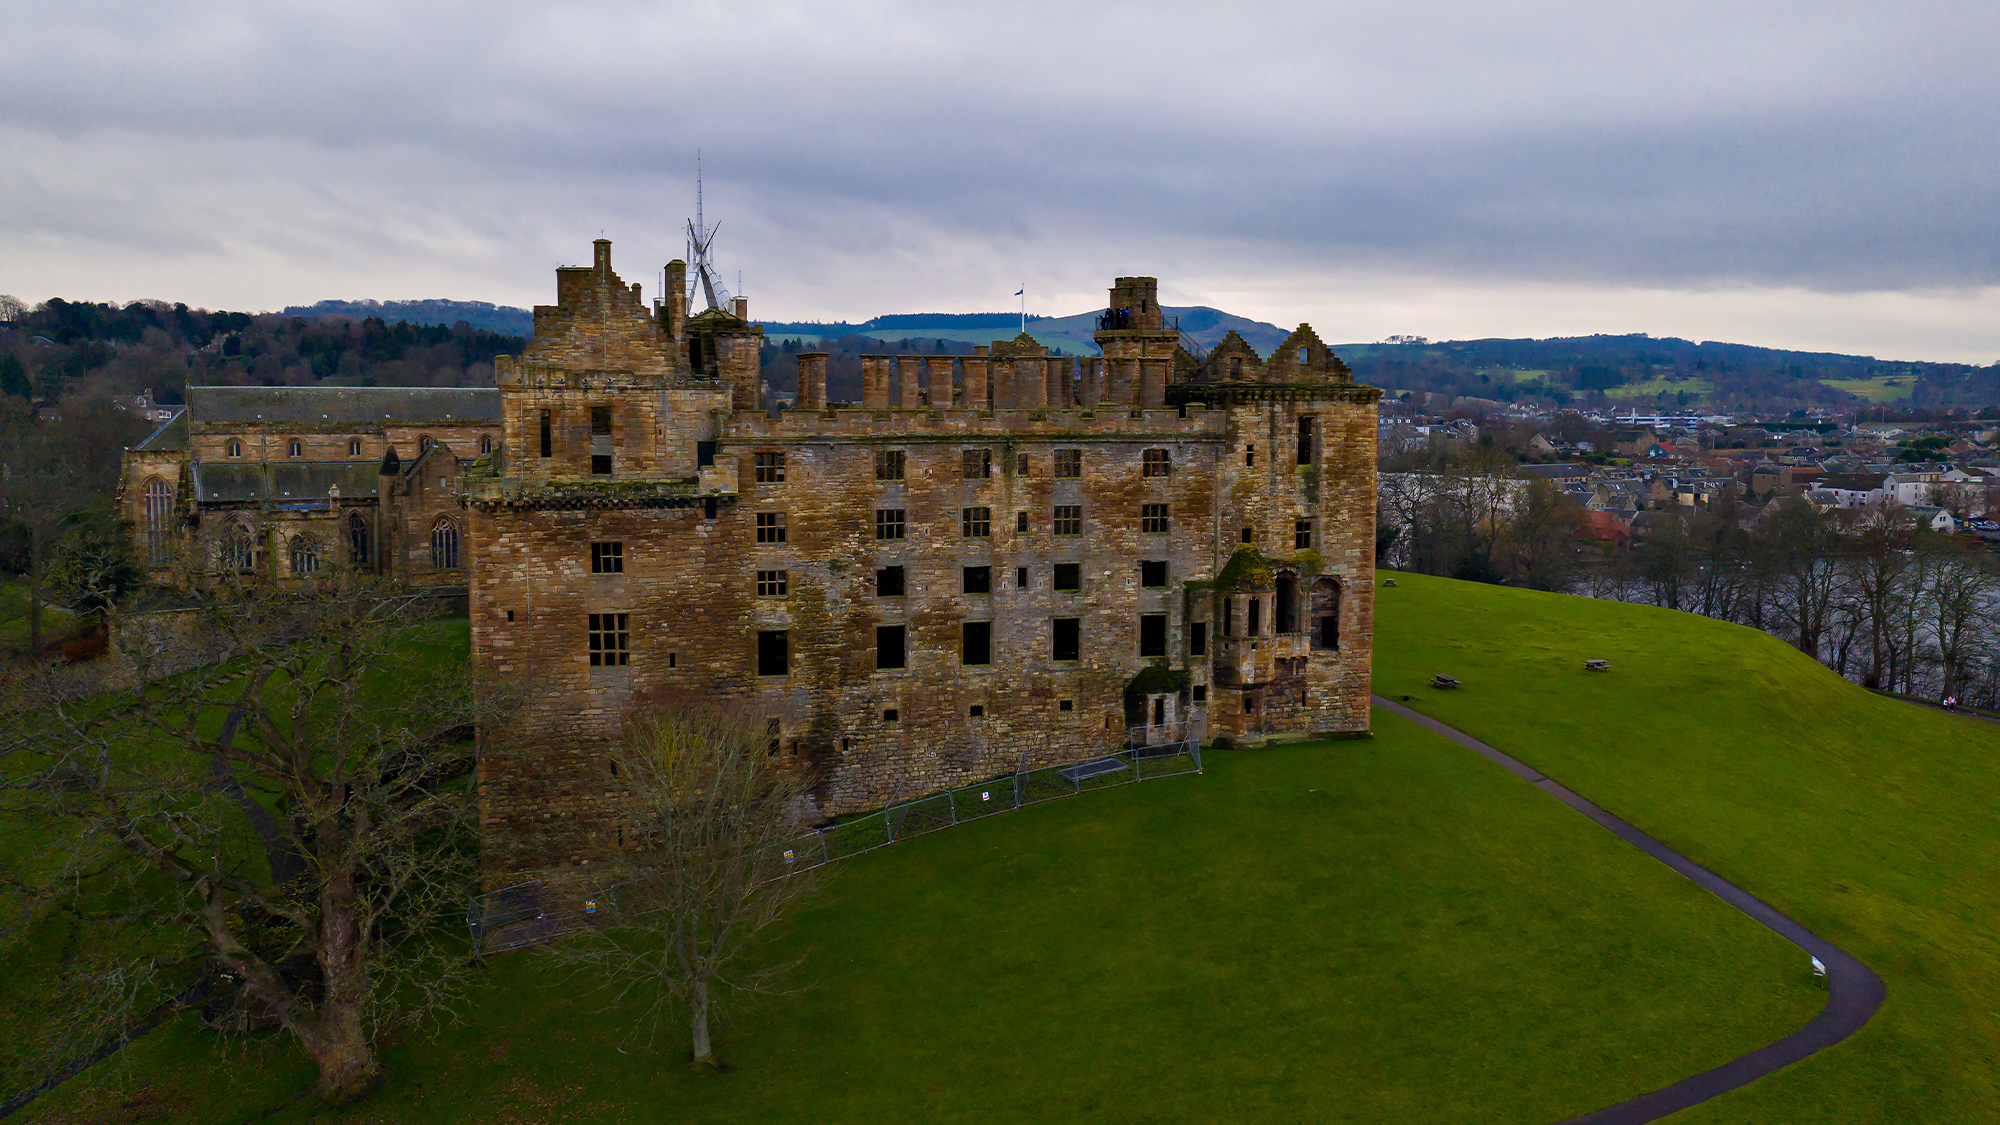 Ruins of Linlithgow Castle, near Edinburgh, Scotland, the birthplace of Mary, Queen of Scots.